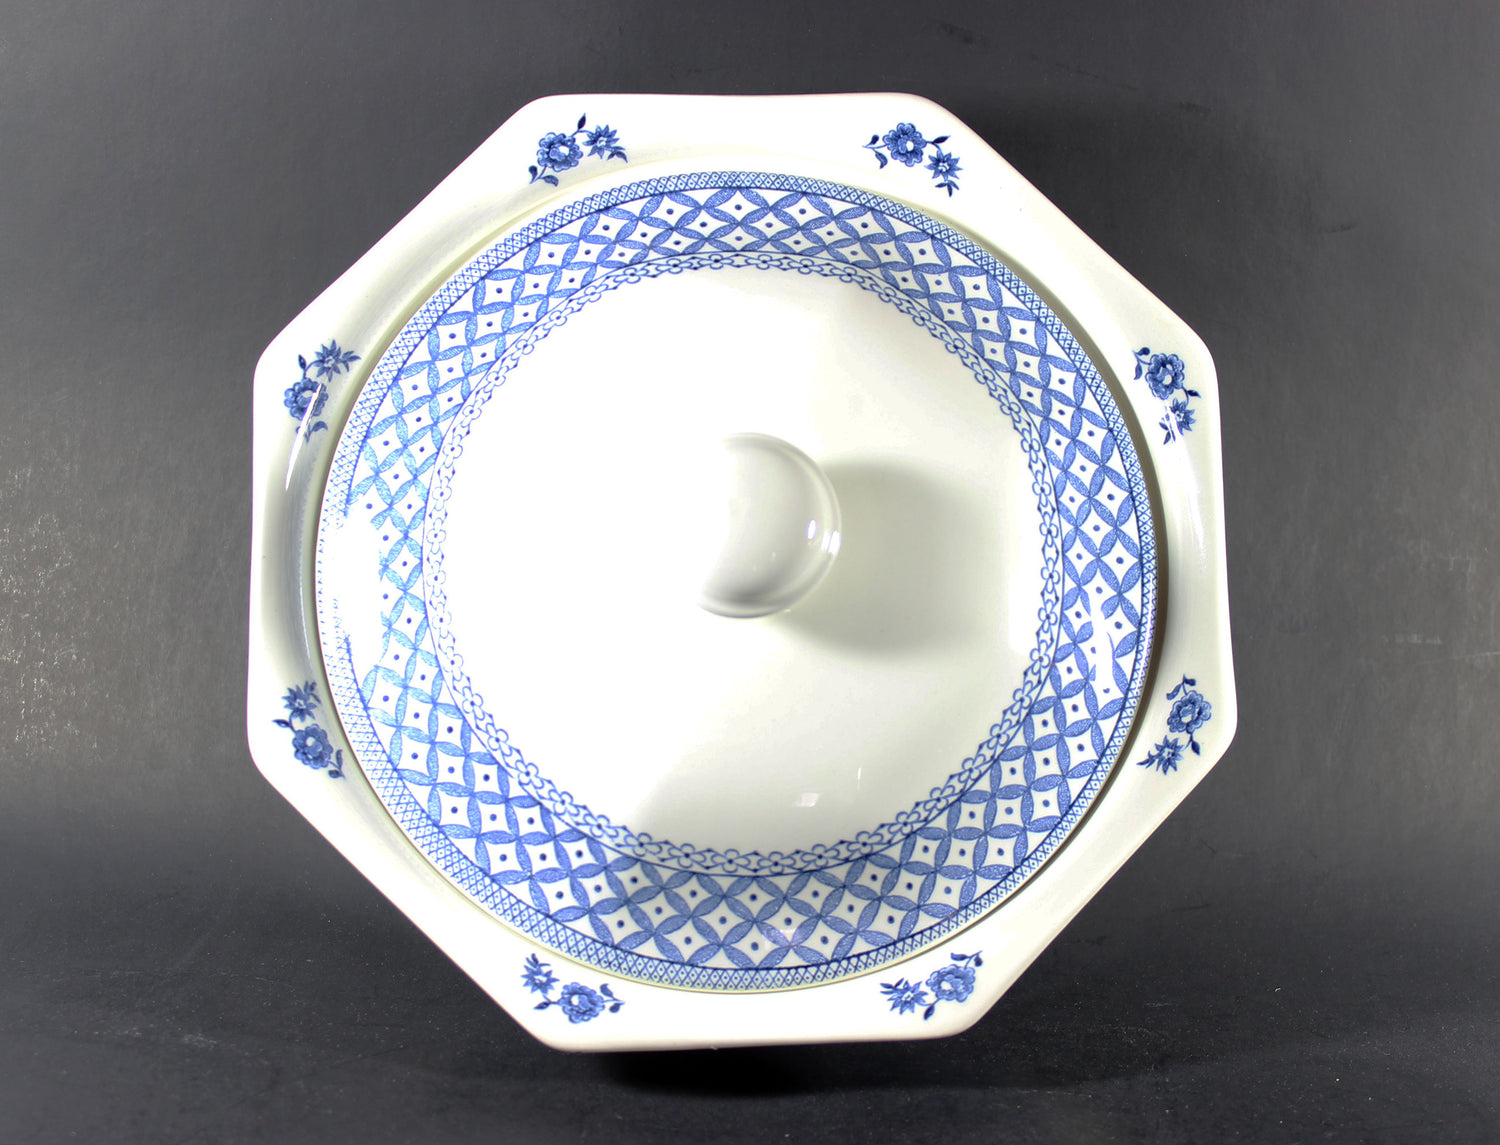 Blue Willow Covered Vegetable Dish, Meakin, Staffordshire